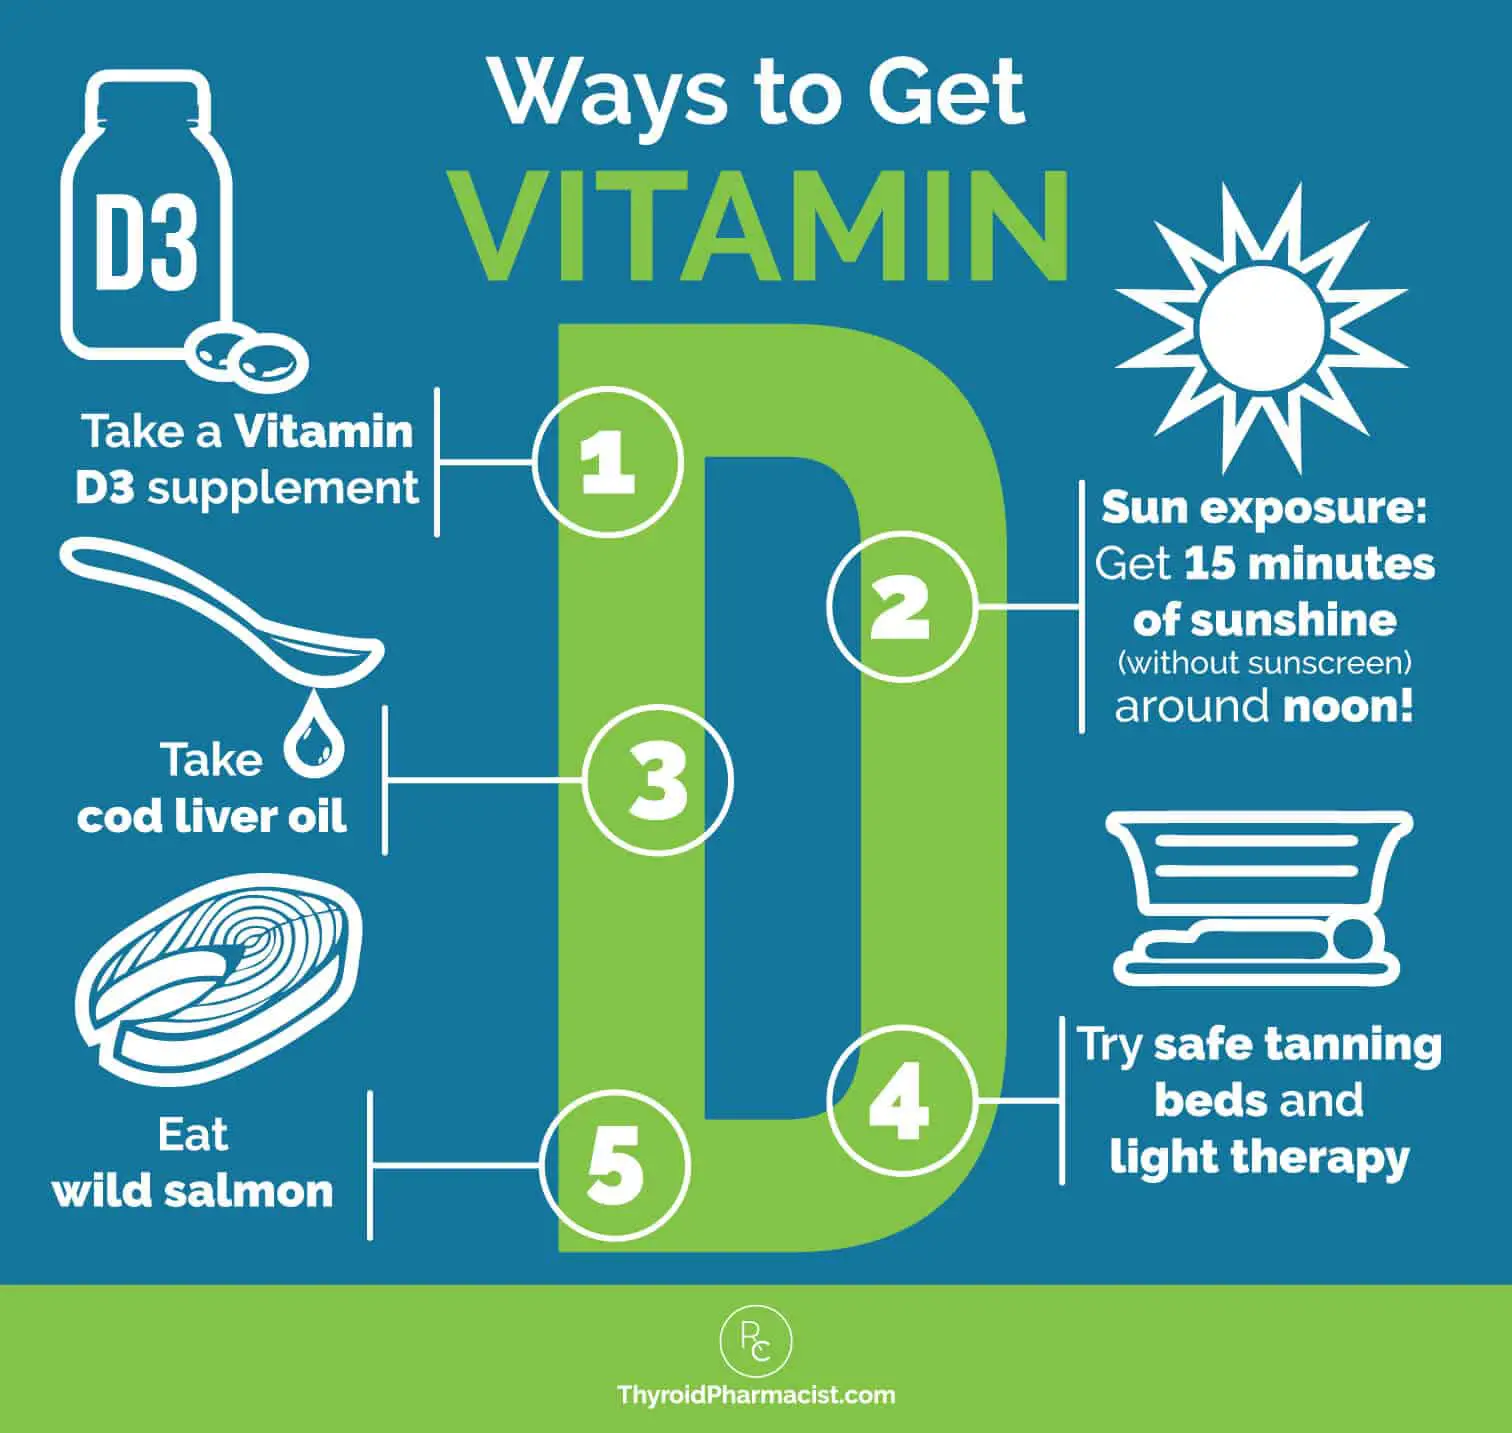 How Much Sun Exposure Is Needed For Vitamin D / The Exact Amount Of ...